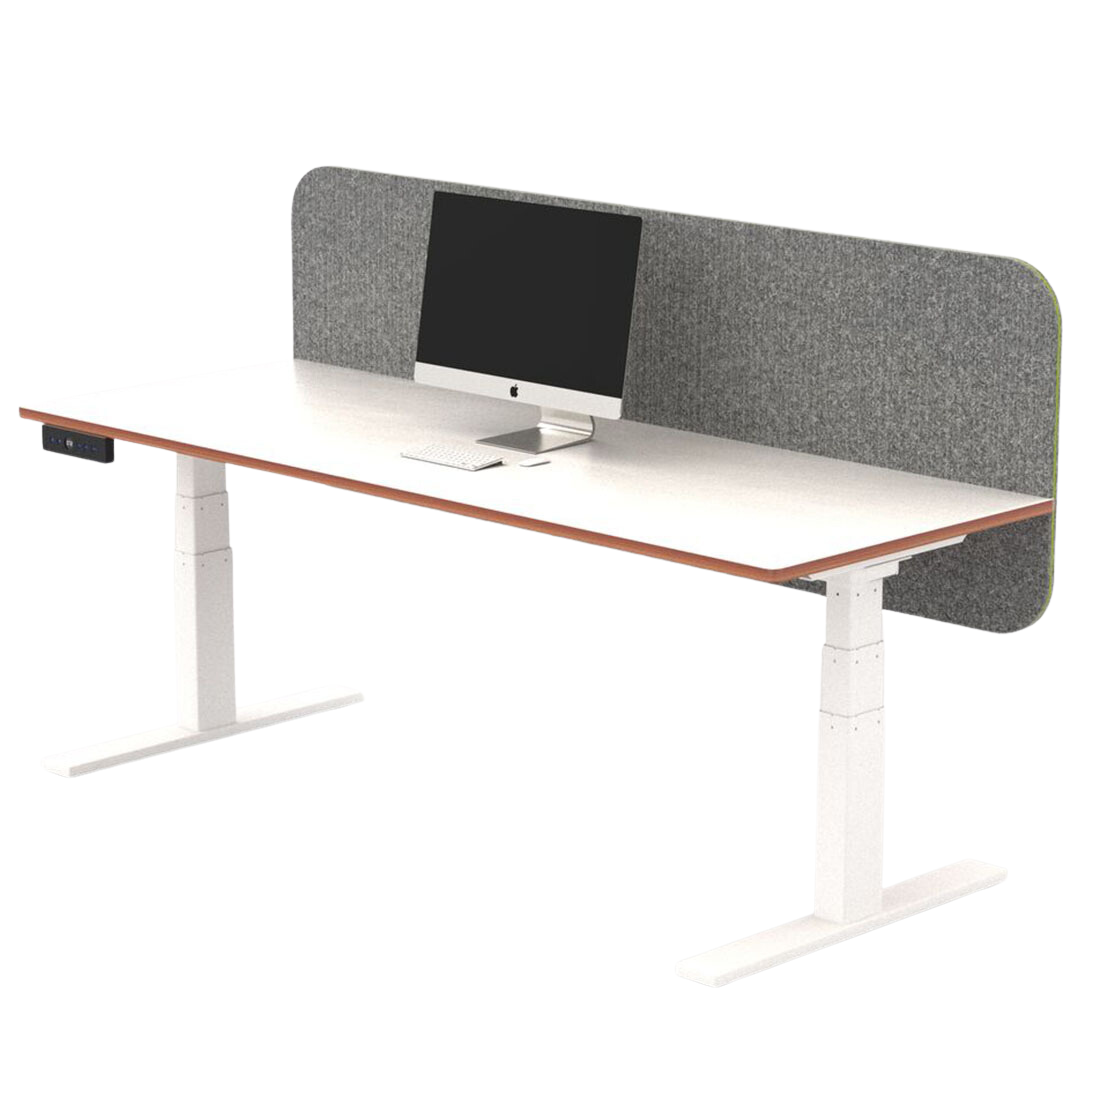 Zorb Desk Mounted Acoustic Screen - switchoffice.com.au